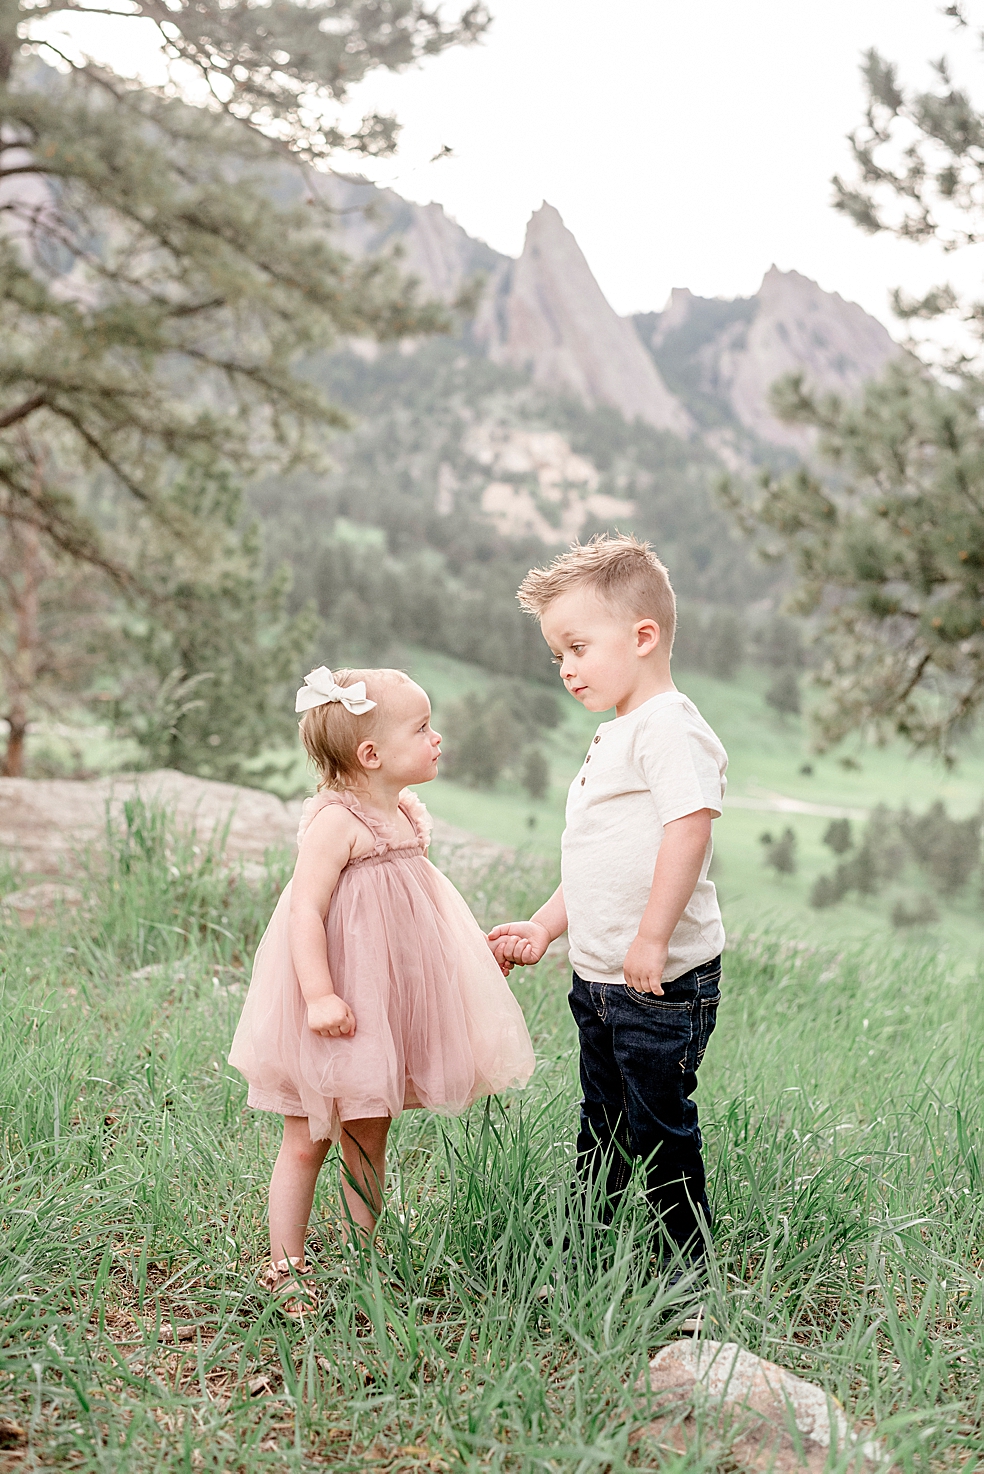 Little brother in cream and sister in pink holding hands | Photo by Jessica Lee Photography